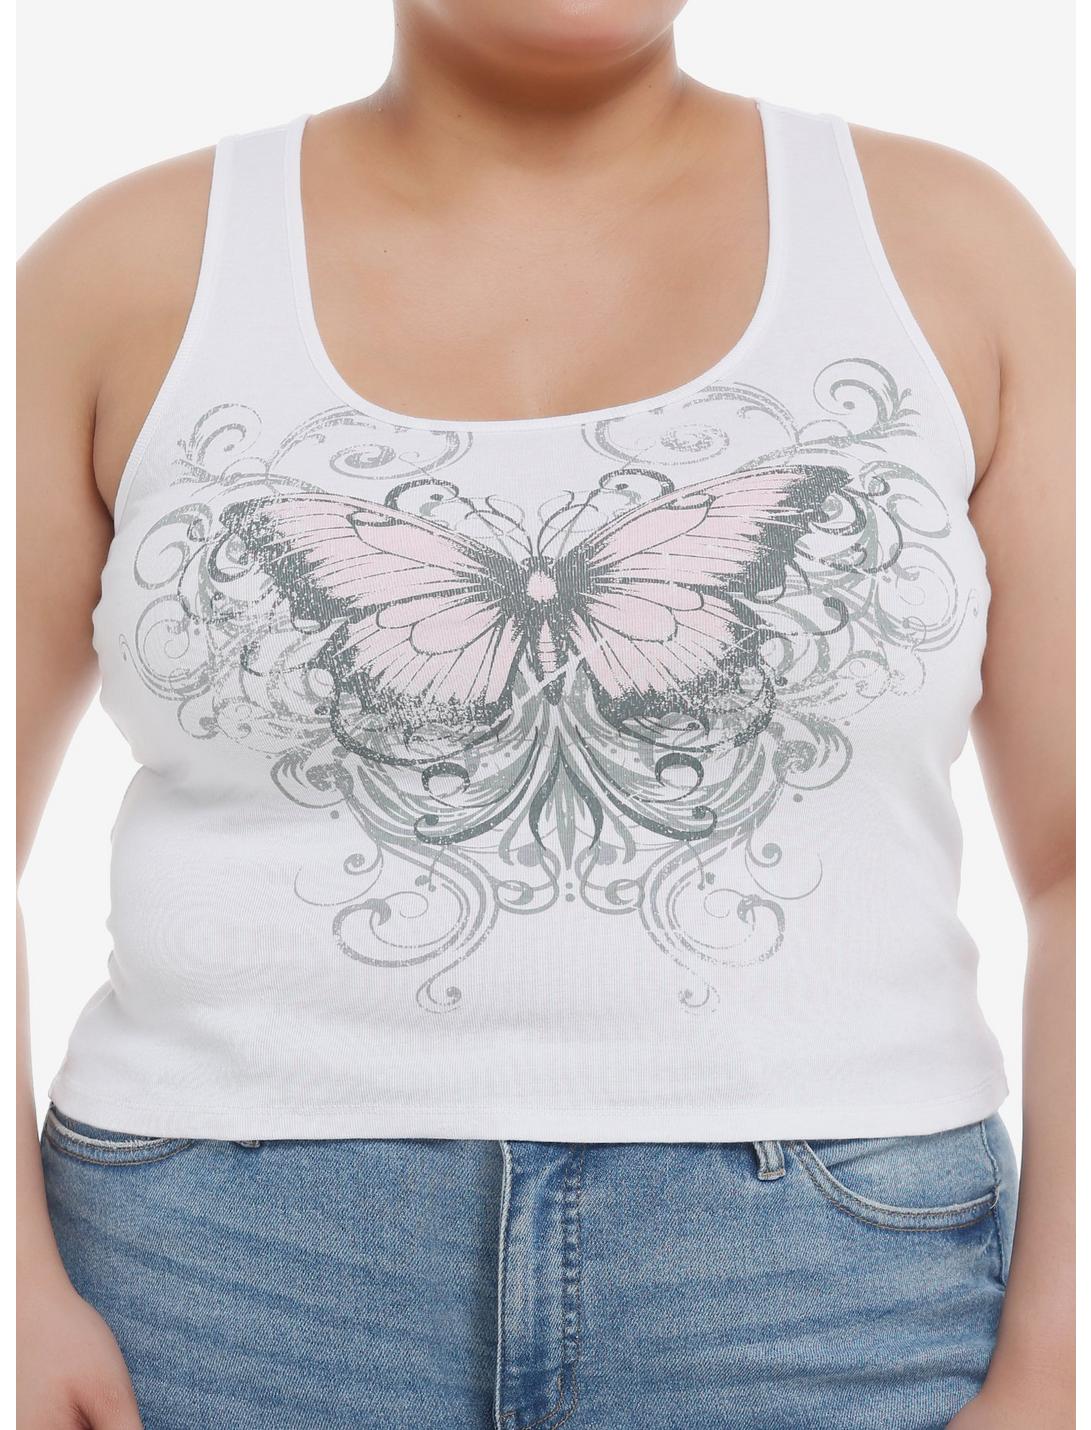 Social Collision® Butterfly Filigree Girls Tank Top Plus Size, PINK, hi-res